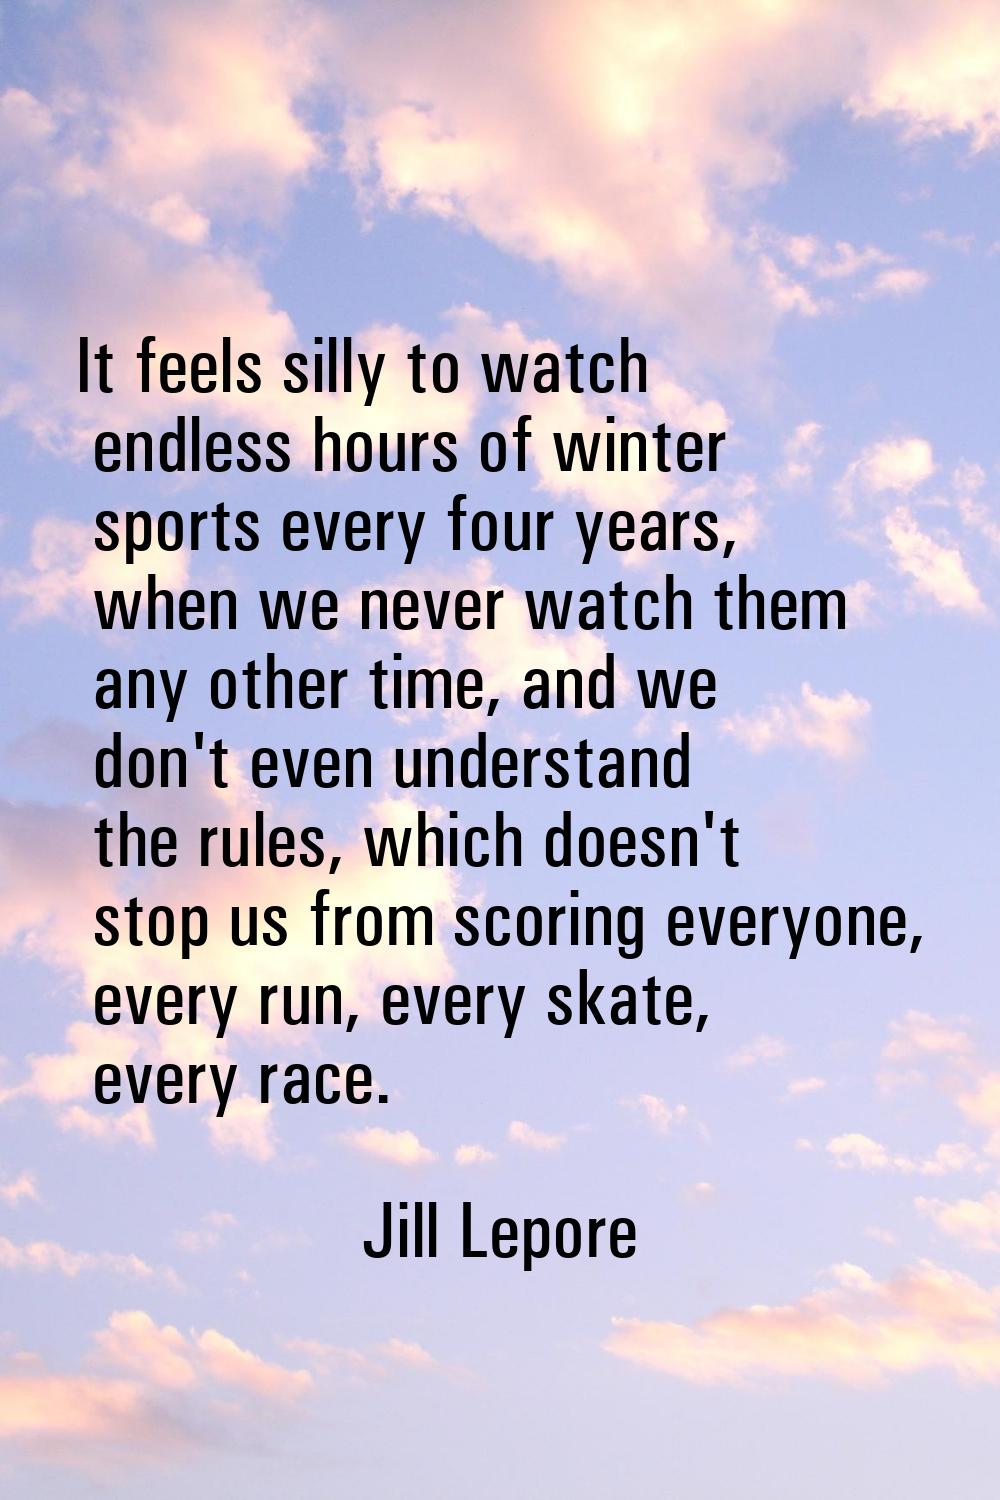 It feels silly to watch endless hours of winter sports every four years, when we never watch them a